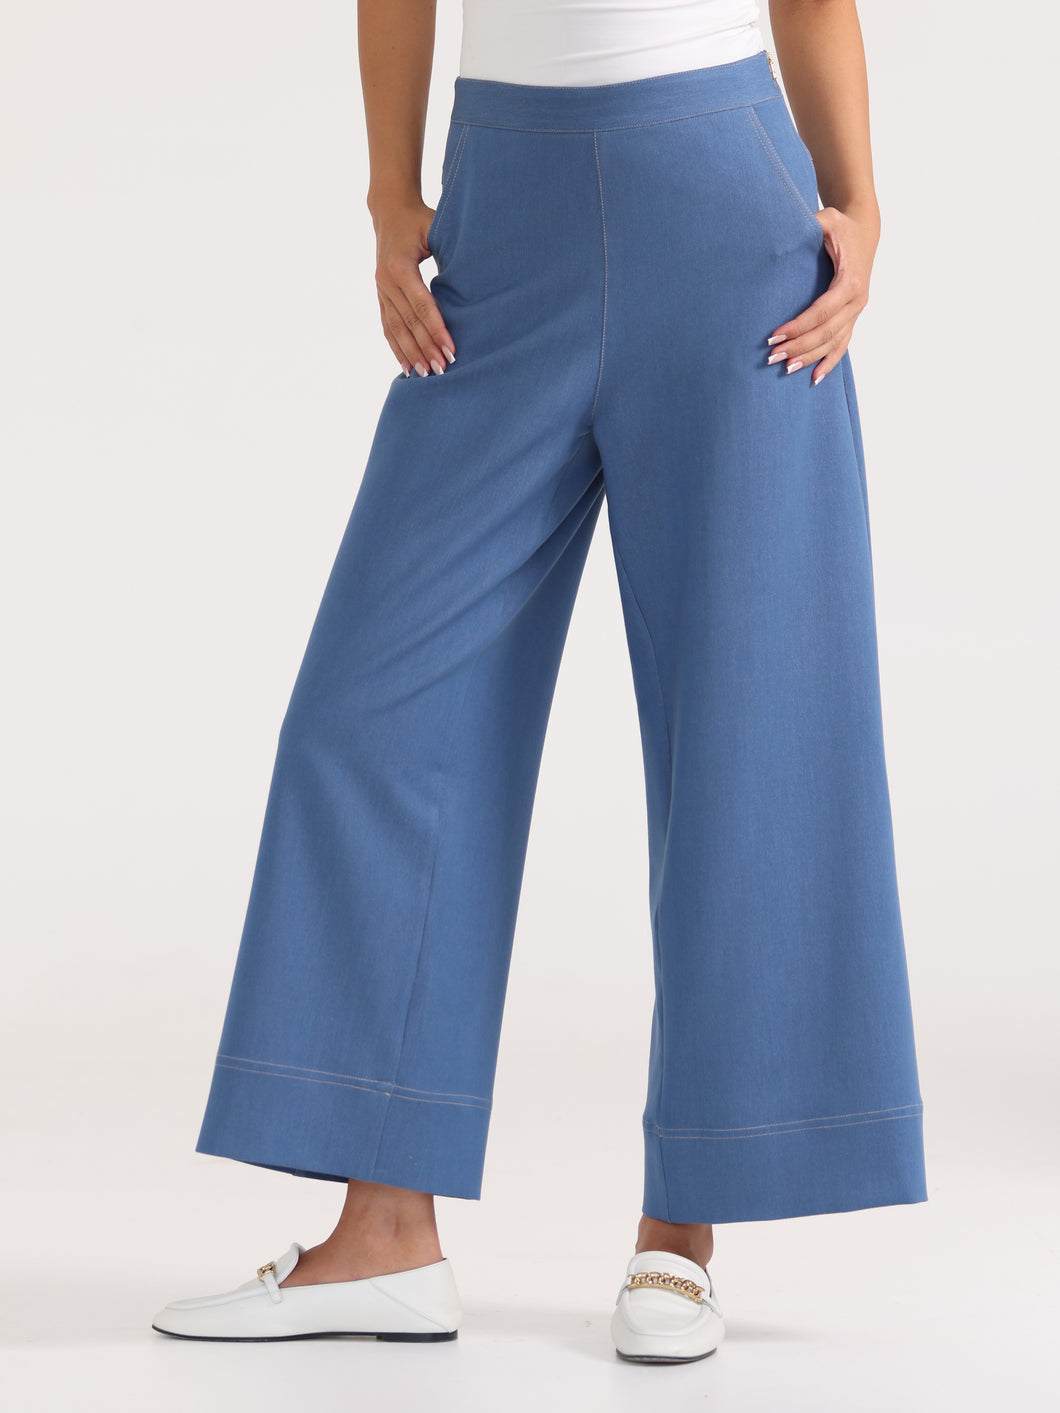 Cobalt Blue Denim Trousers with Contrast Stitching